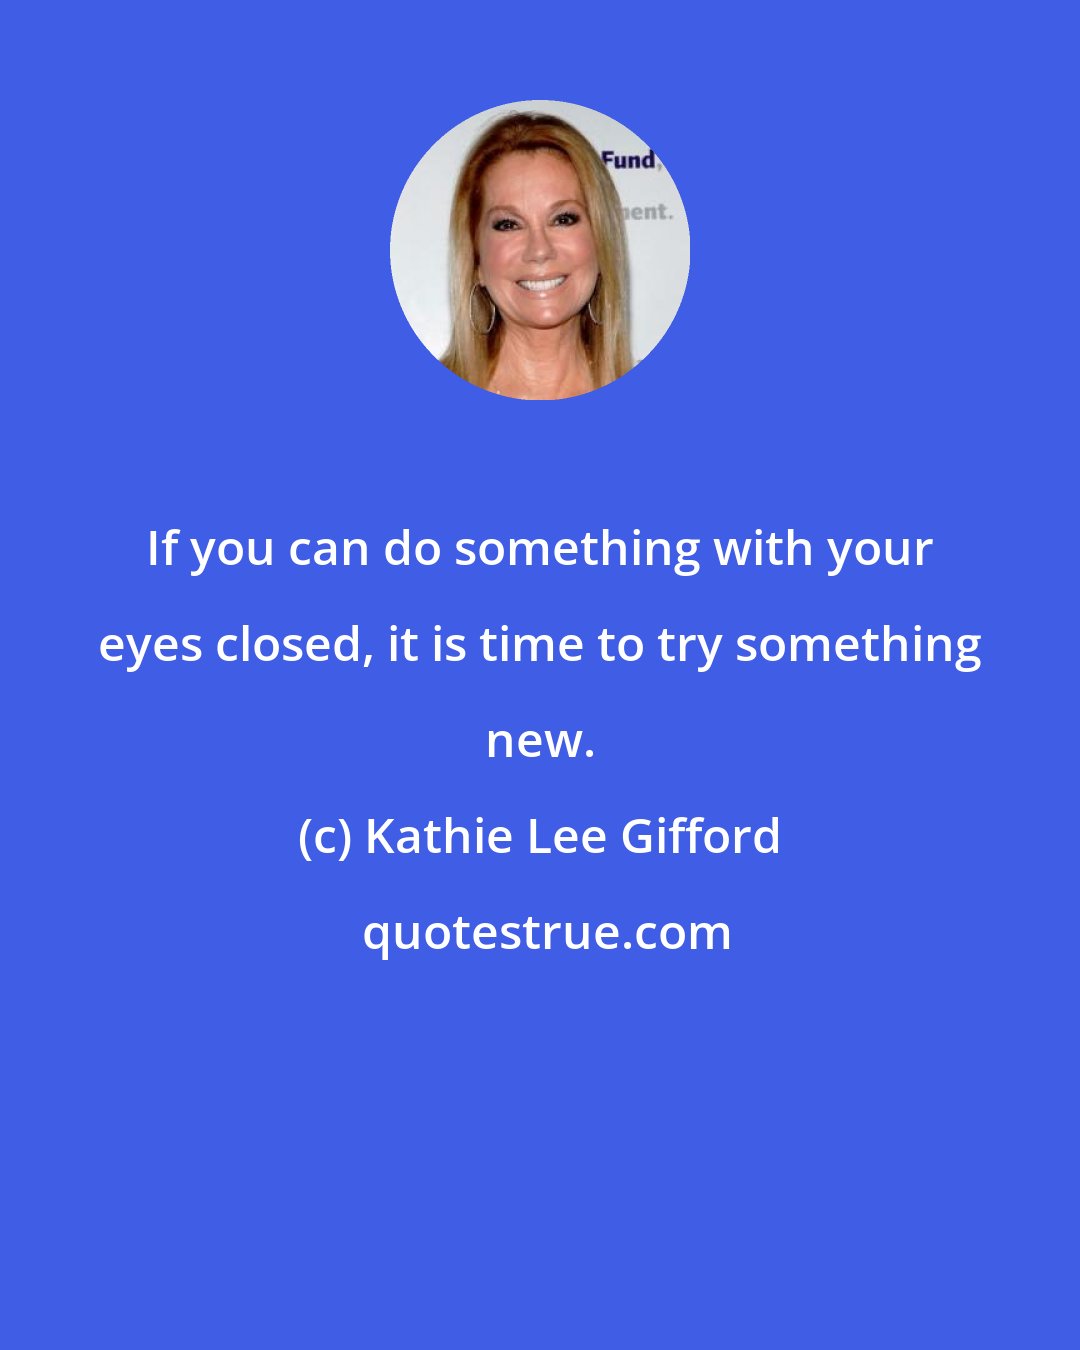 Kathie Lee Gifford: If you can do something with your eyes closed, it is time to try something new.